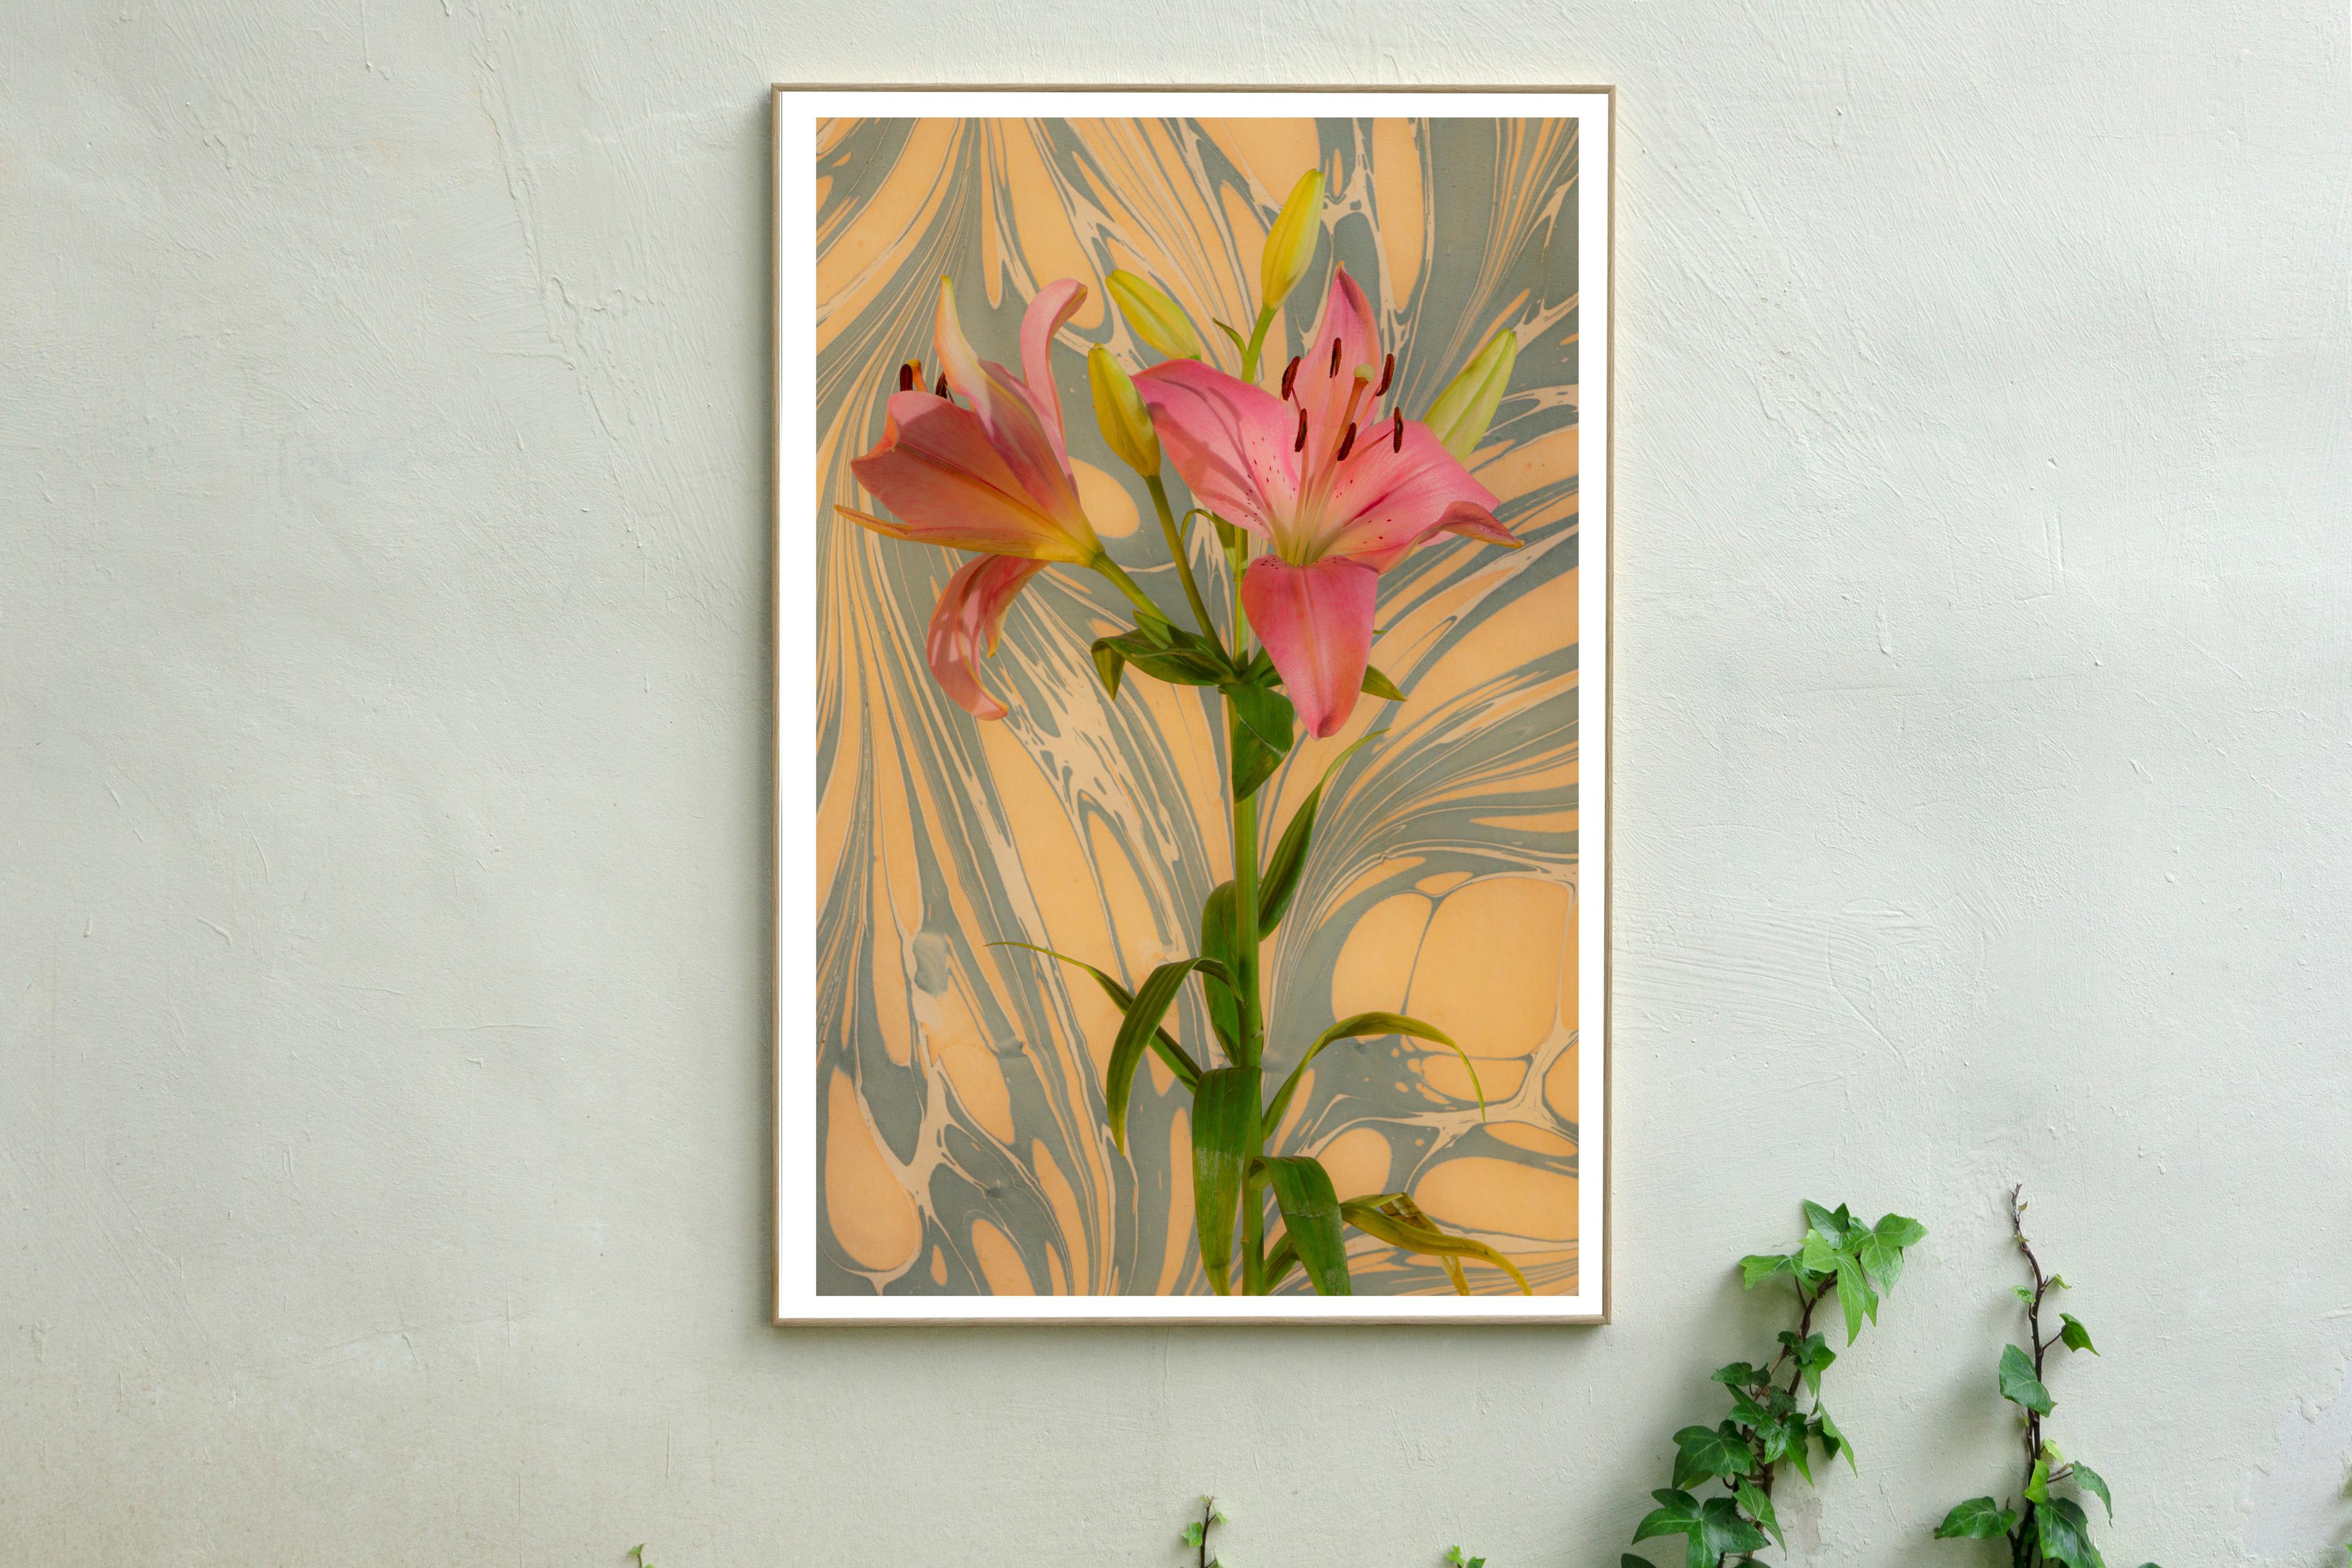 Seventies Psychedelic Flowers, Pink Lilys Bouquet, Modern Still Life, Giclée  - Print by Kind of Cyan